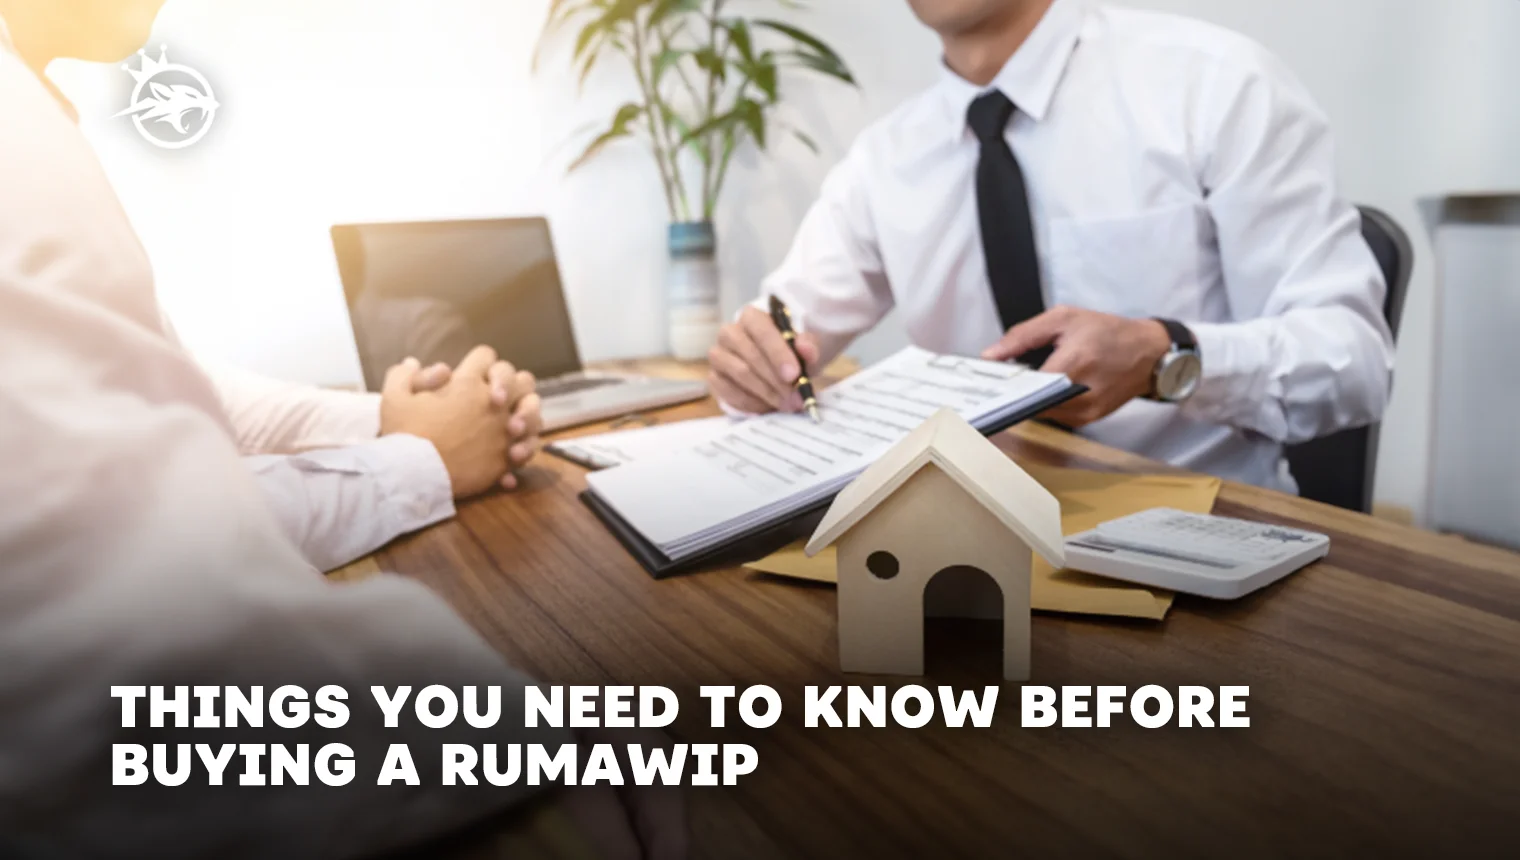 Things you need to know before buying a rumawip